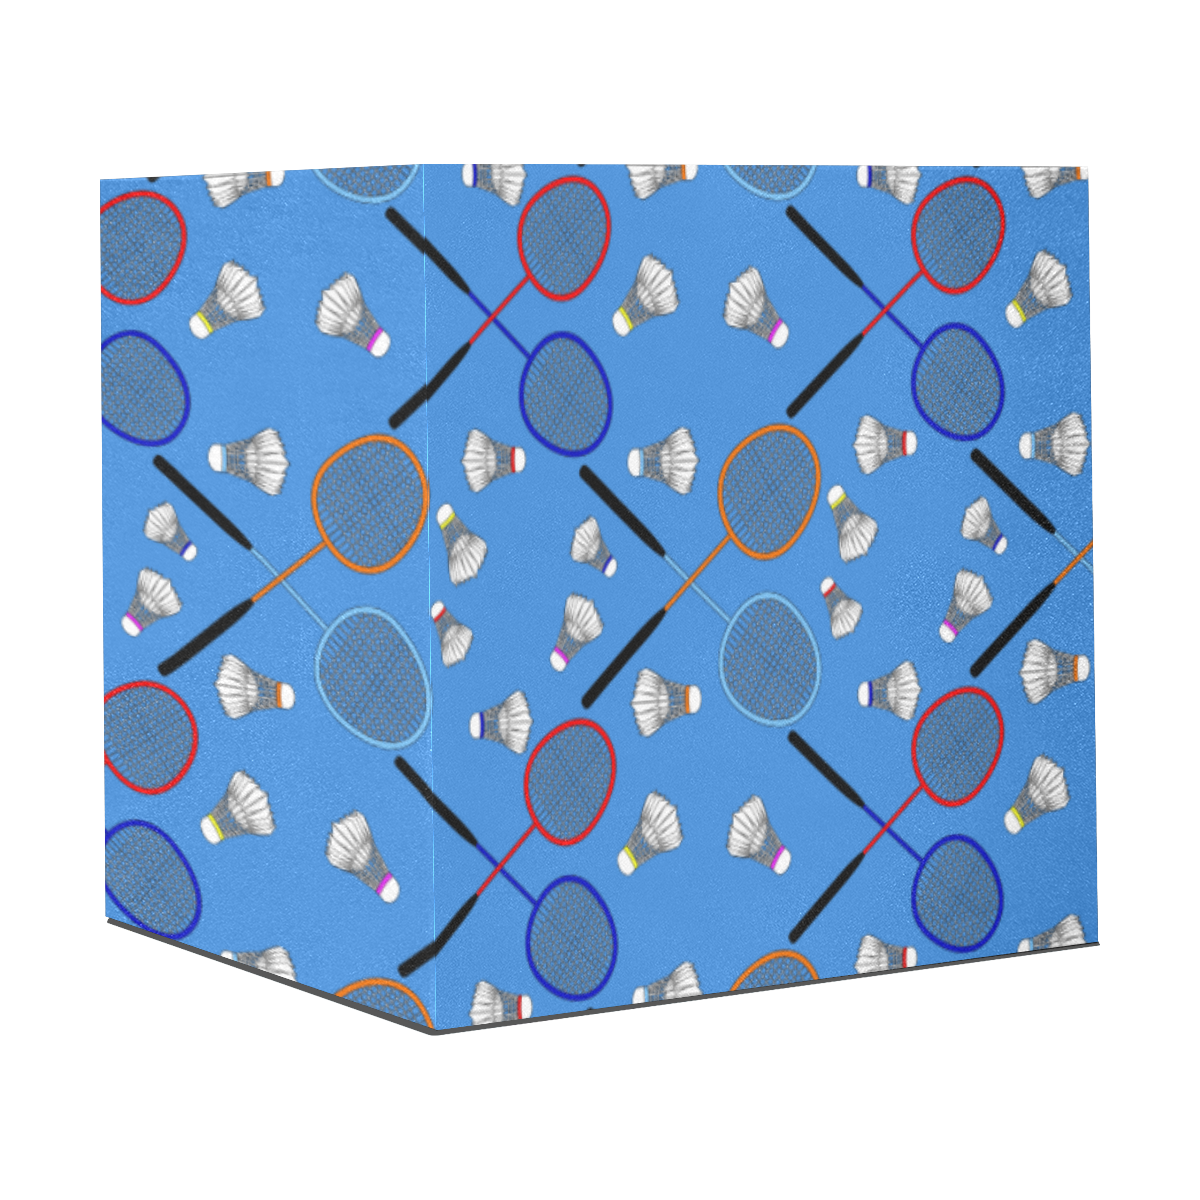 Badminton Rackets and Shuttlecocks Pattern Sports Blue Gift Wrapping Paper 58"x 23" (1 Roll)